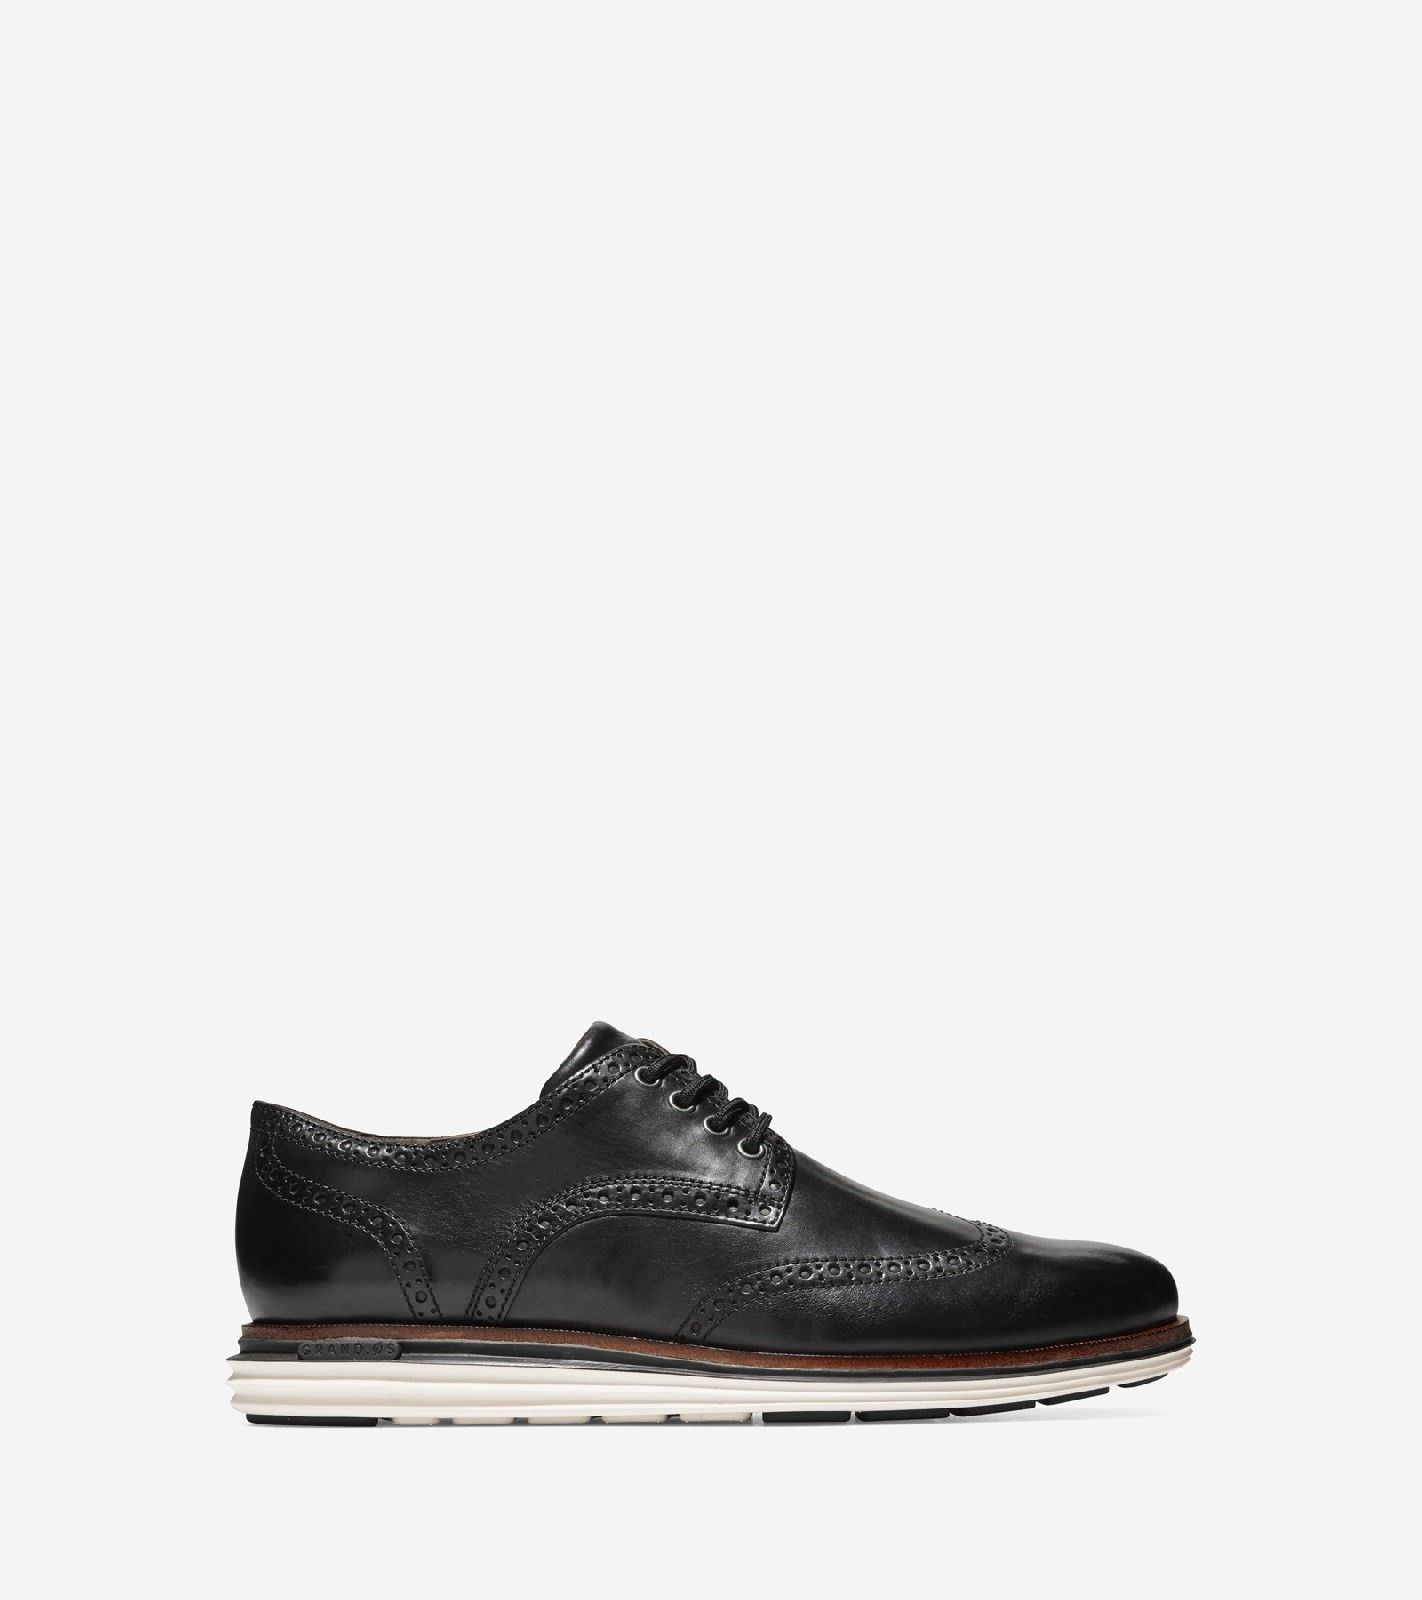 The OriginalGrand Wingtip Oxford is wrapped in sleek leather and finished with traditional brogue detailing. Sturdy soles feature GRANDFOAM footbed for a supremely comfortable fit that goes the distance. Premium leather uppers. 
Mesh lining with leather accents. 
Dual density EVA outsole with rubber pods for comfort. 
Grand O.S. technology.